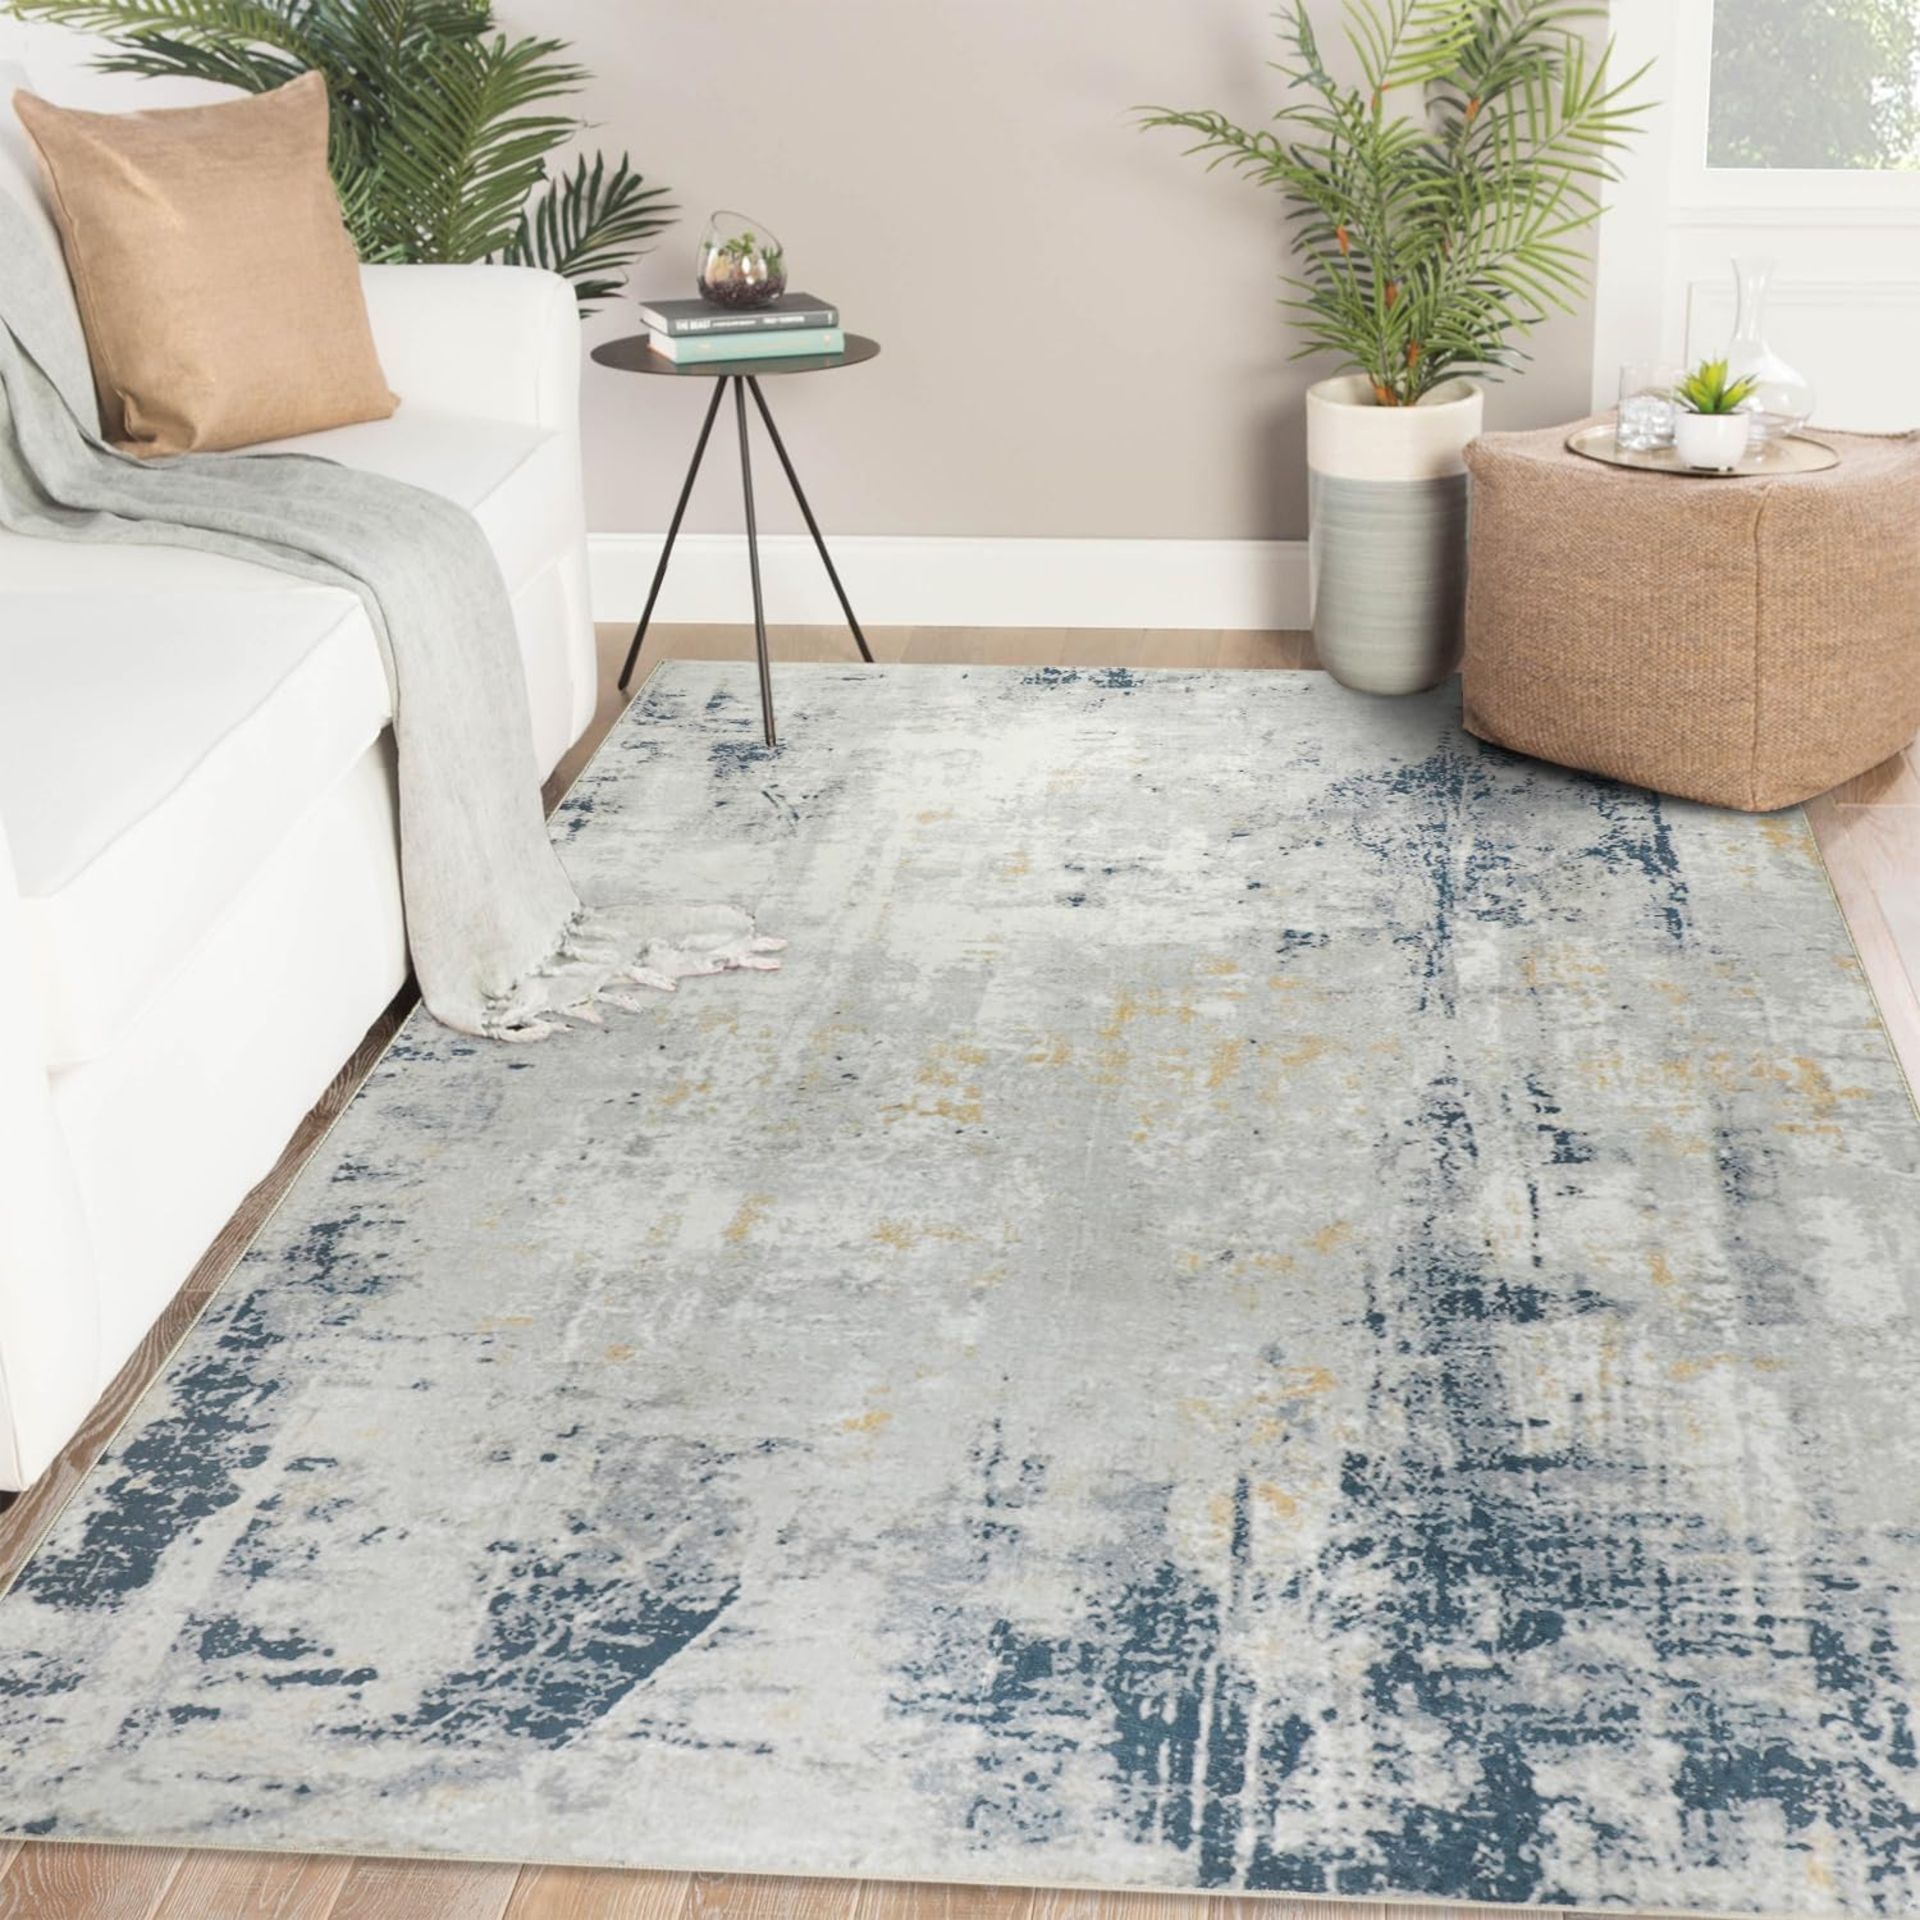 RRP £35.37 Famiaby Rugs Living Room 120x170cm Soft Fluffy Area